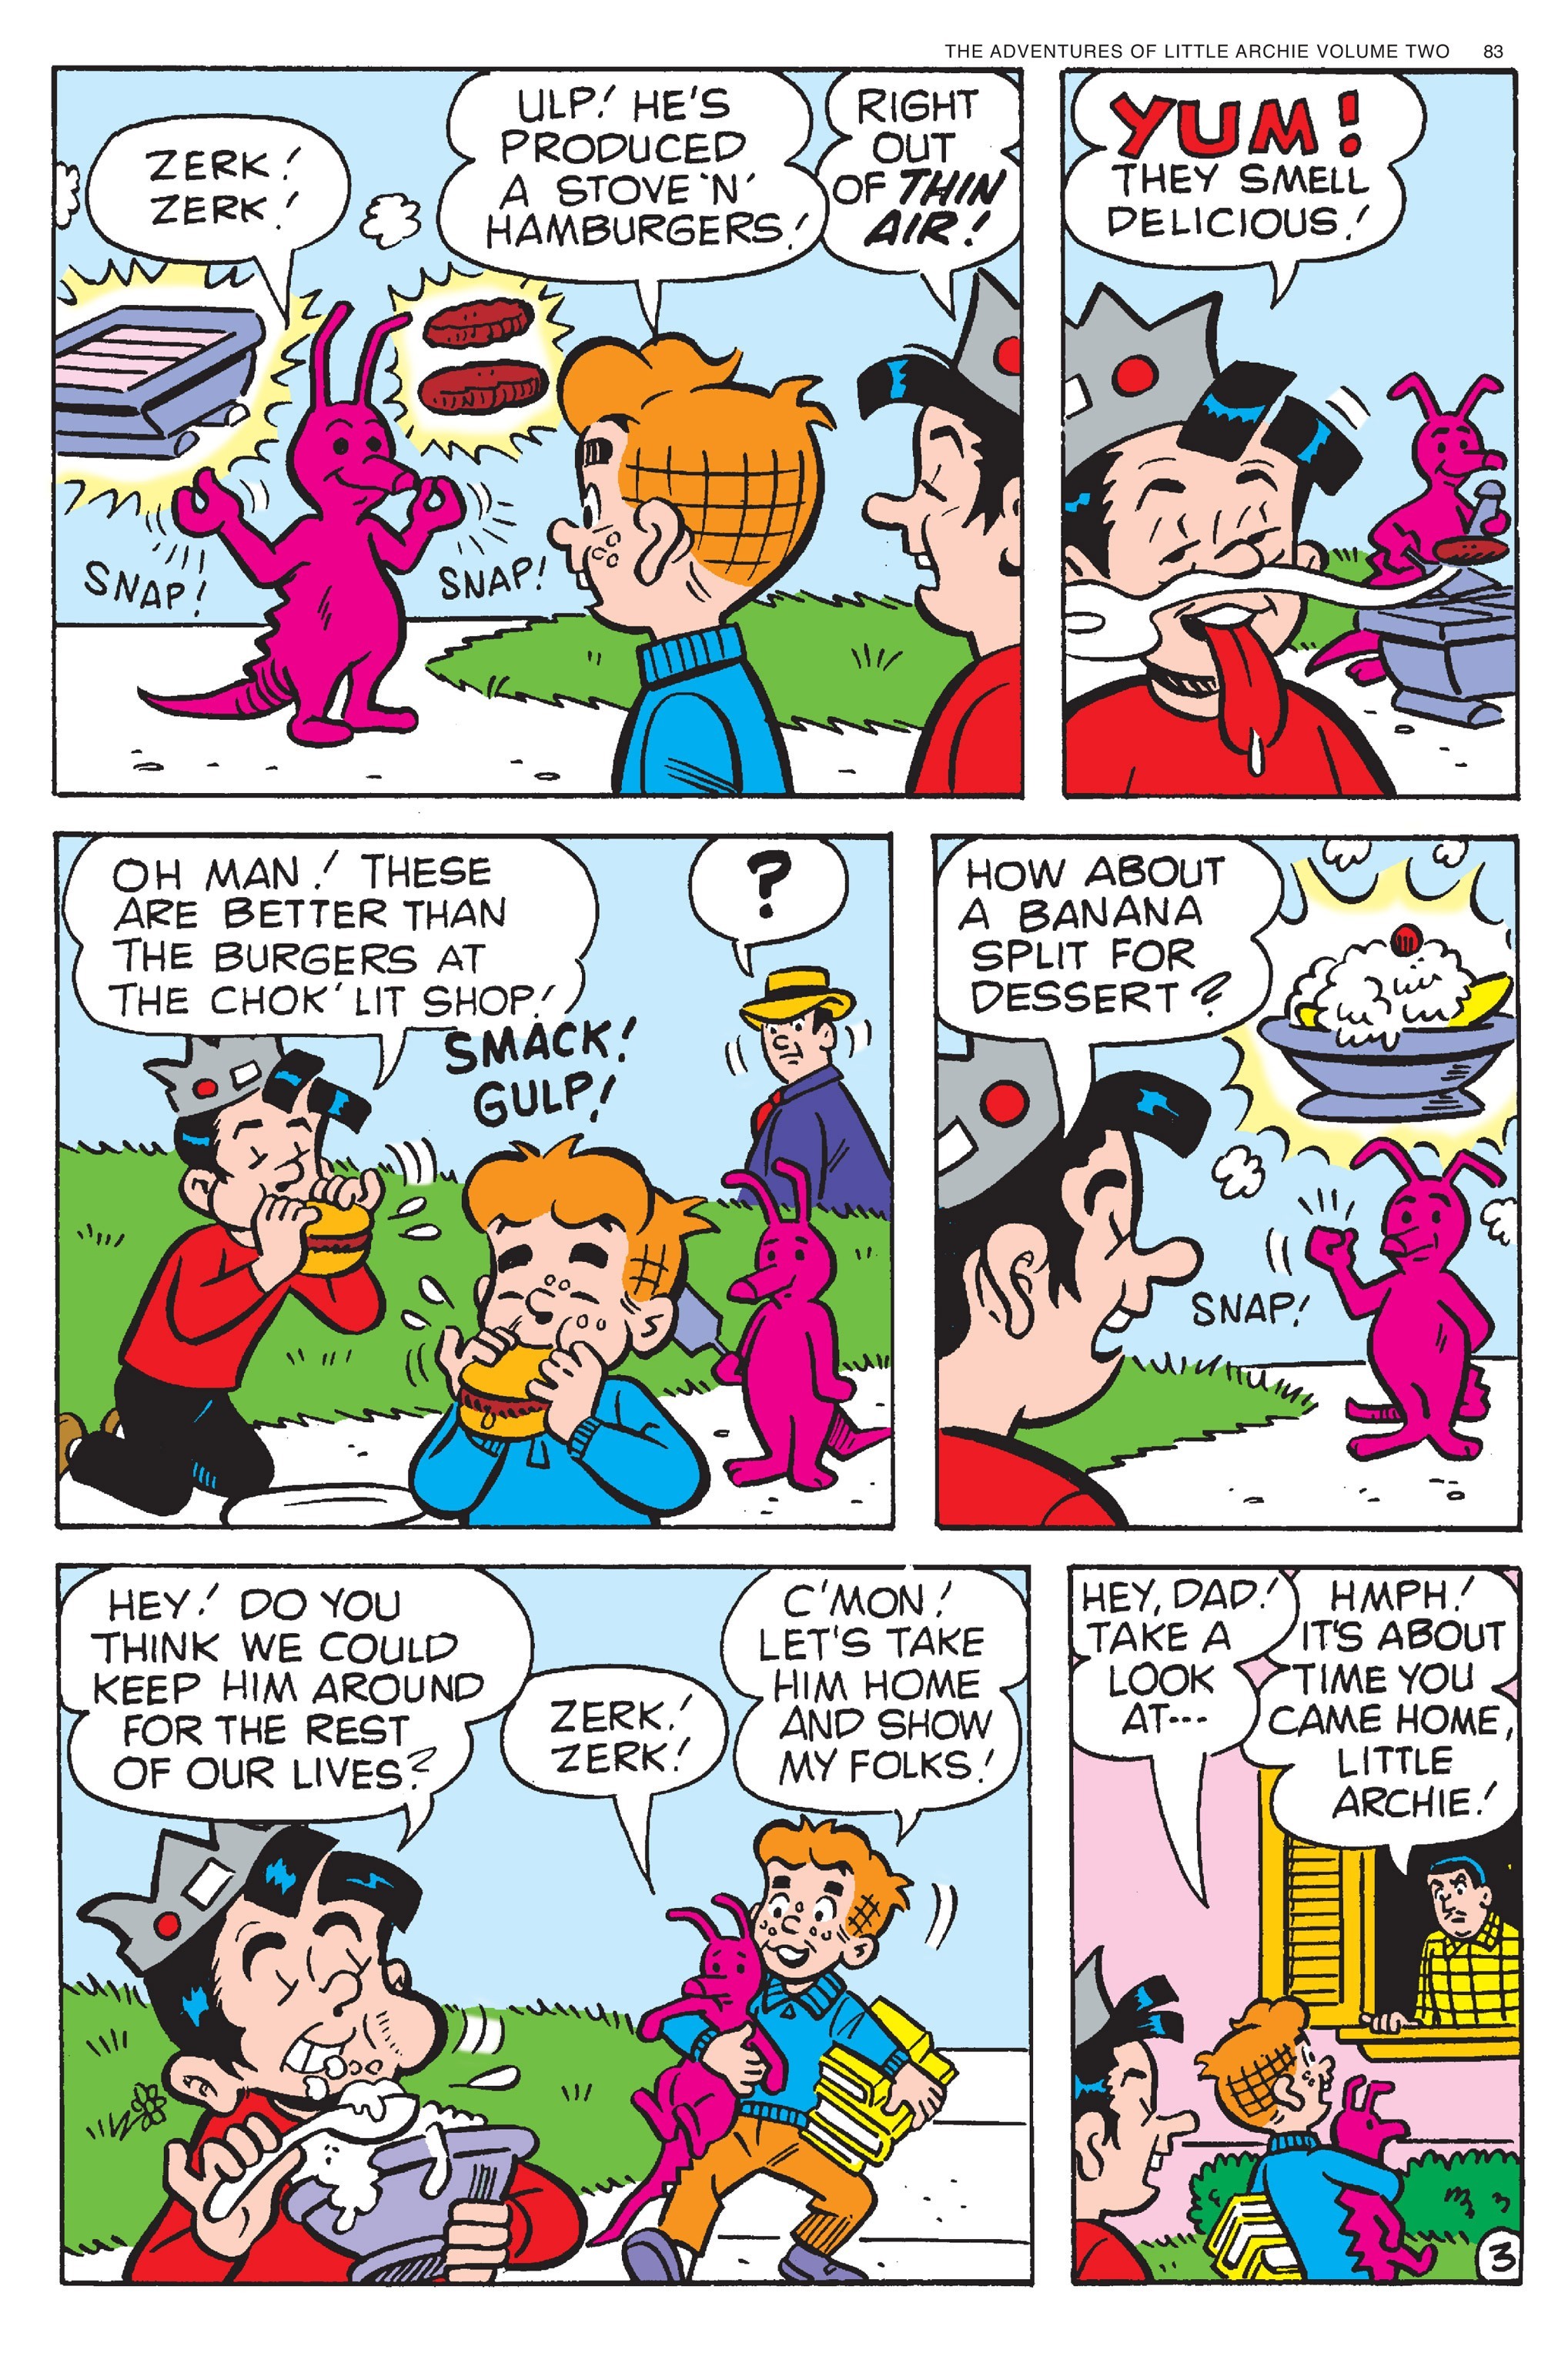 Read online Adventures of Little Archie comic -  Issue # TPB 2 - 84